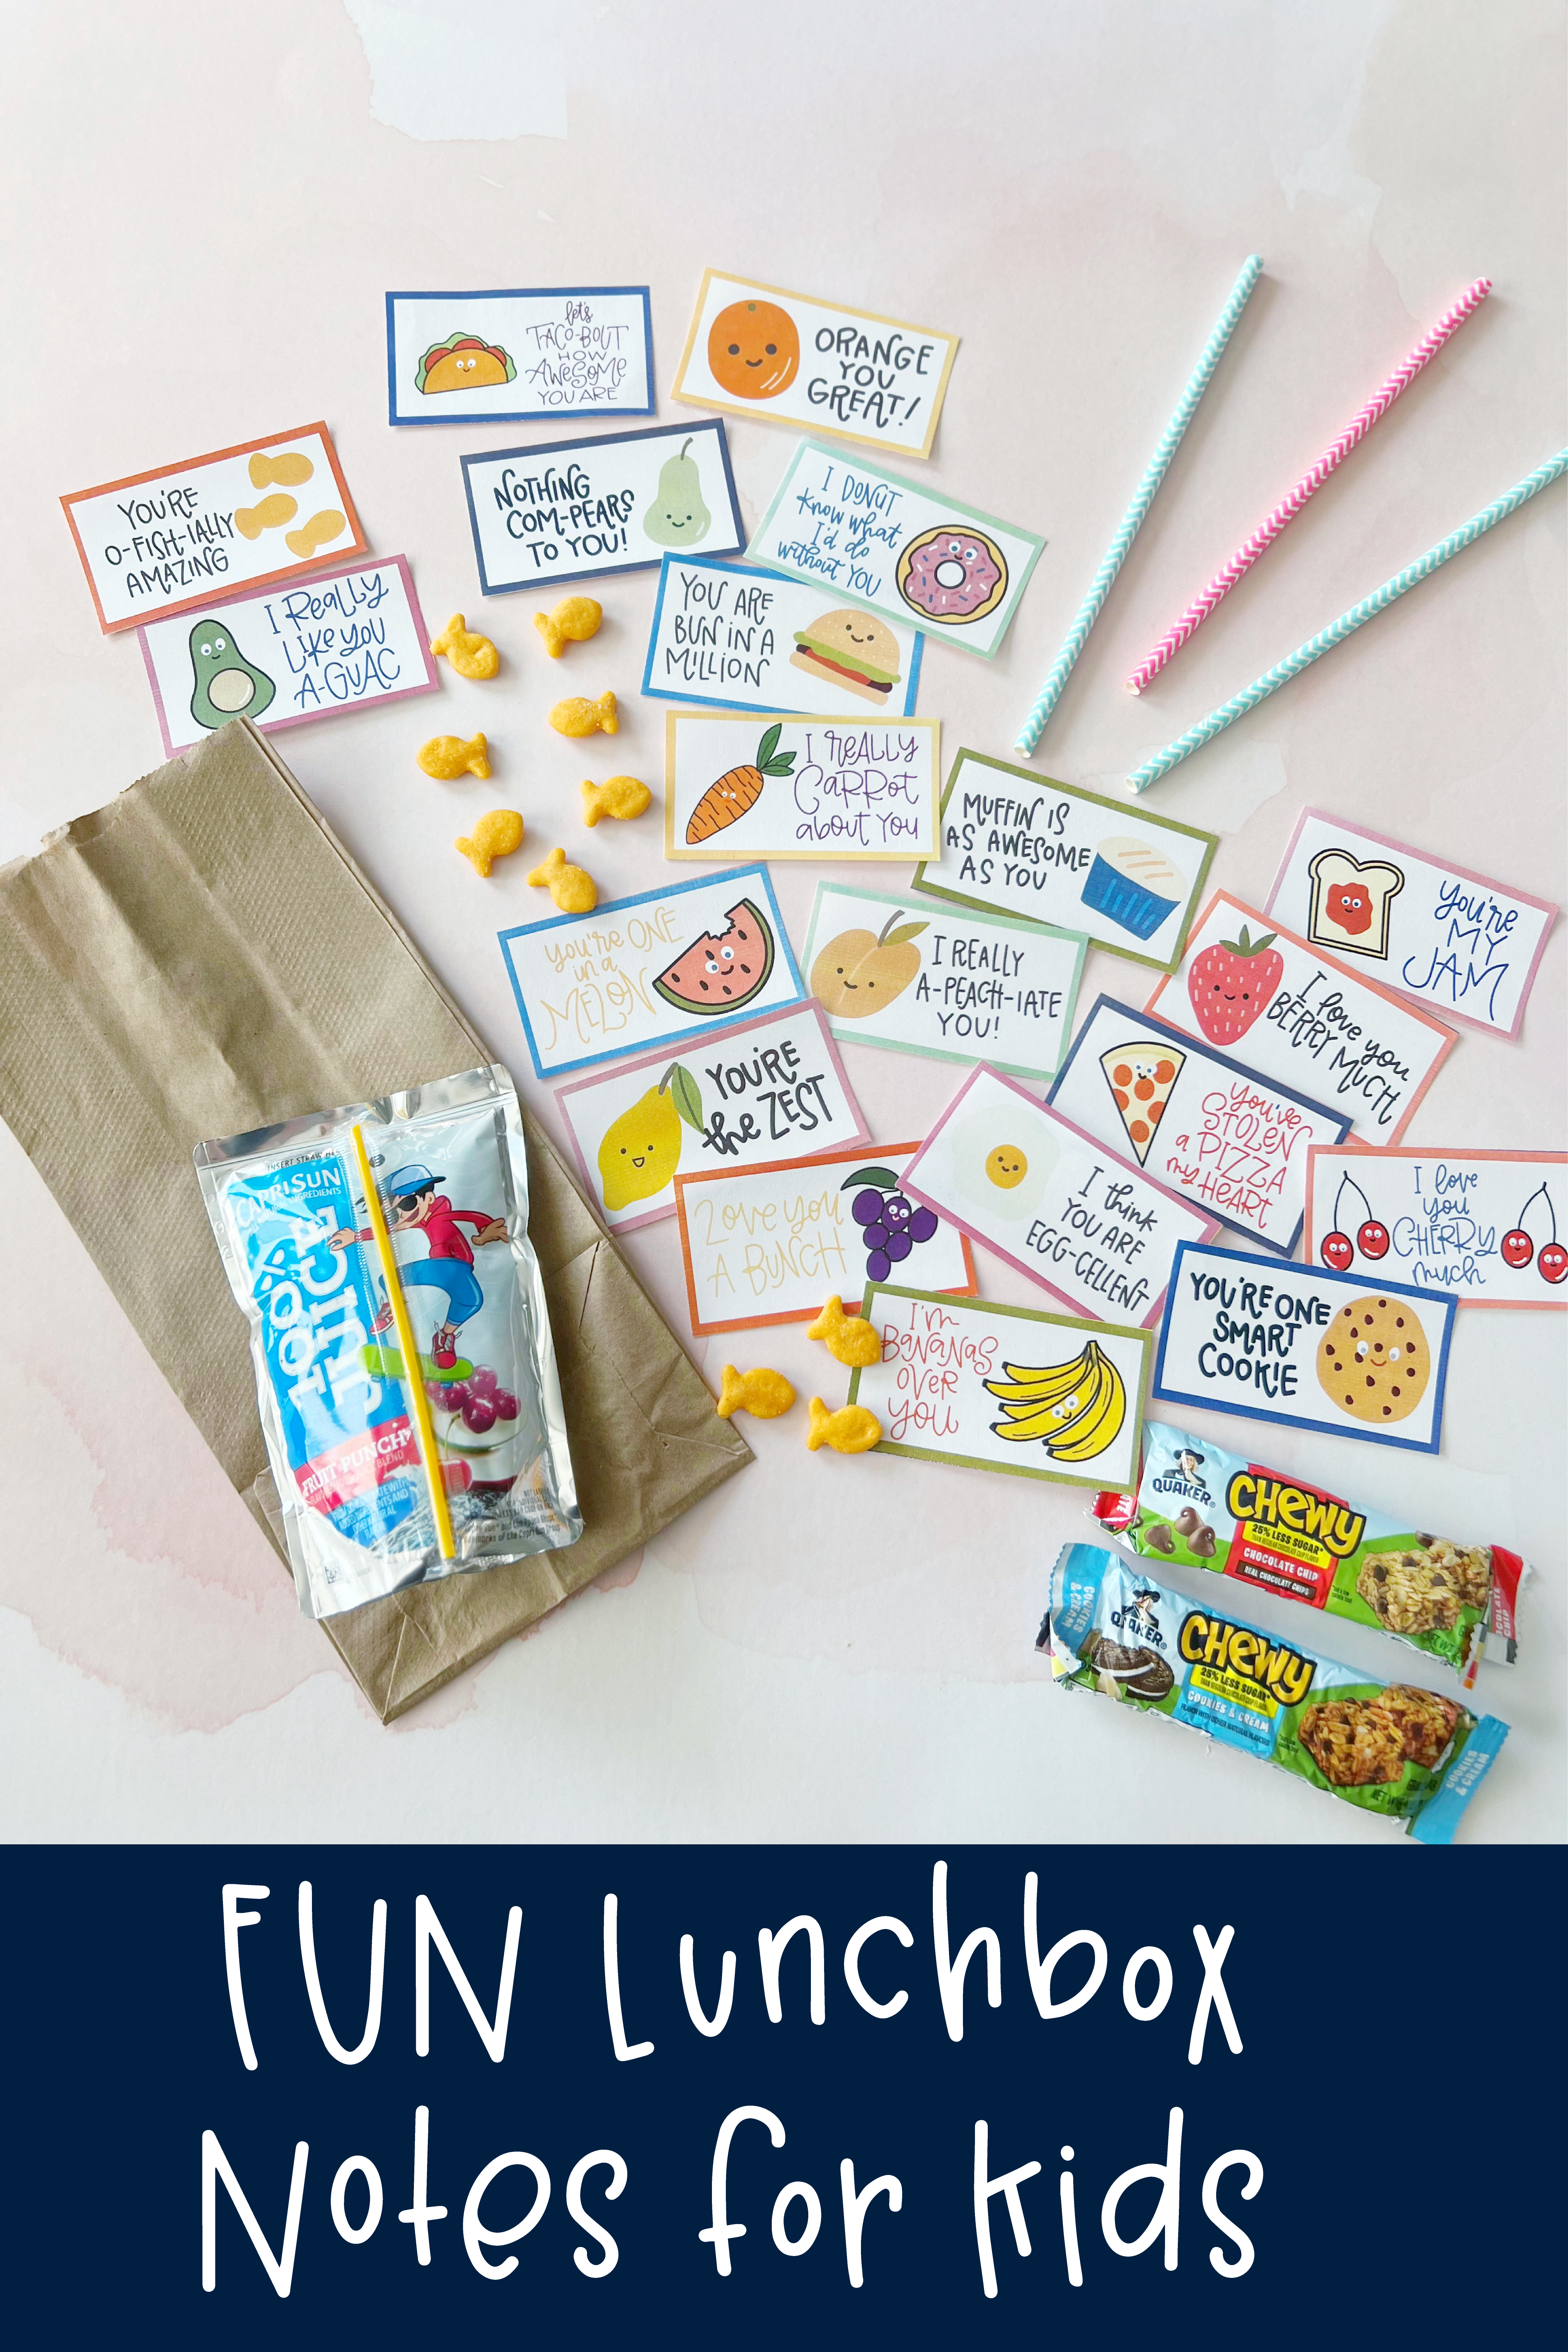 Lunchbox notes for Kids!